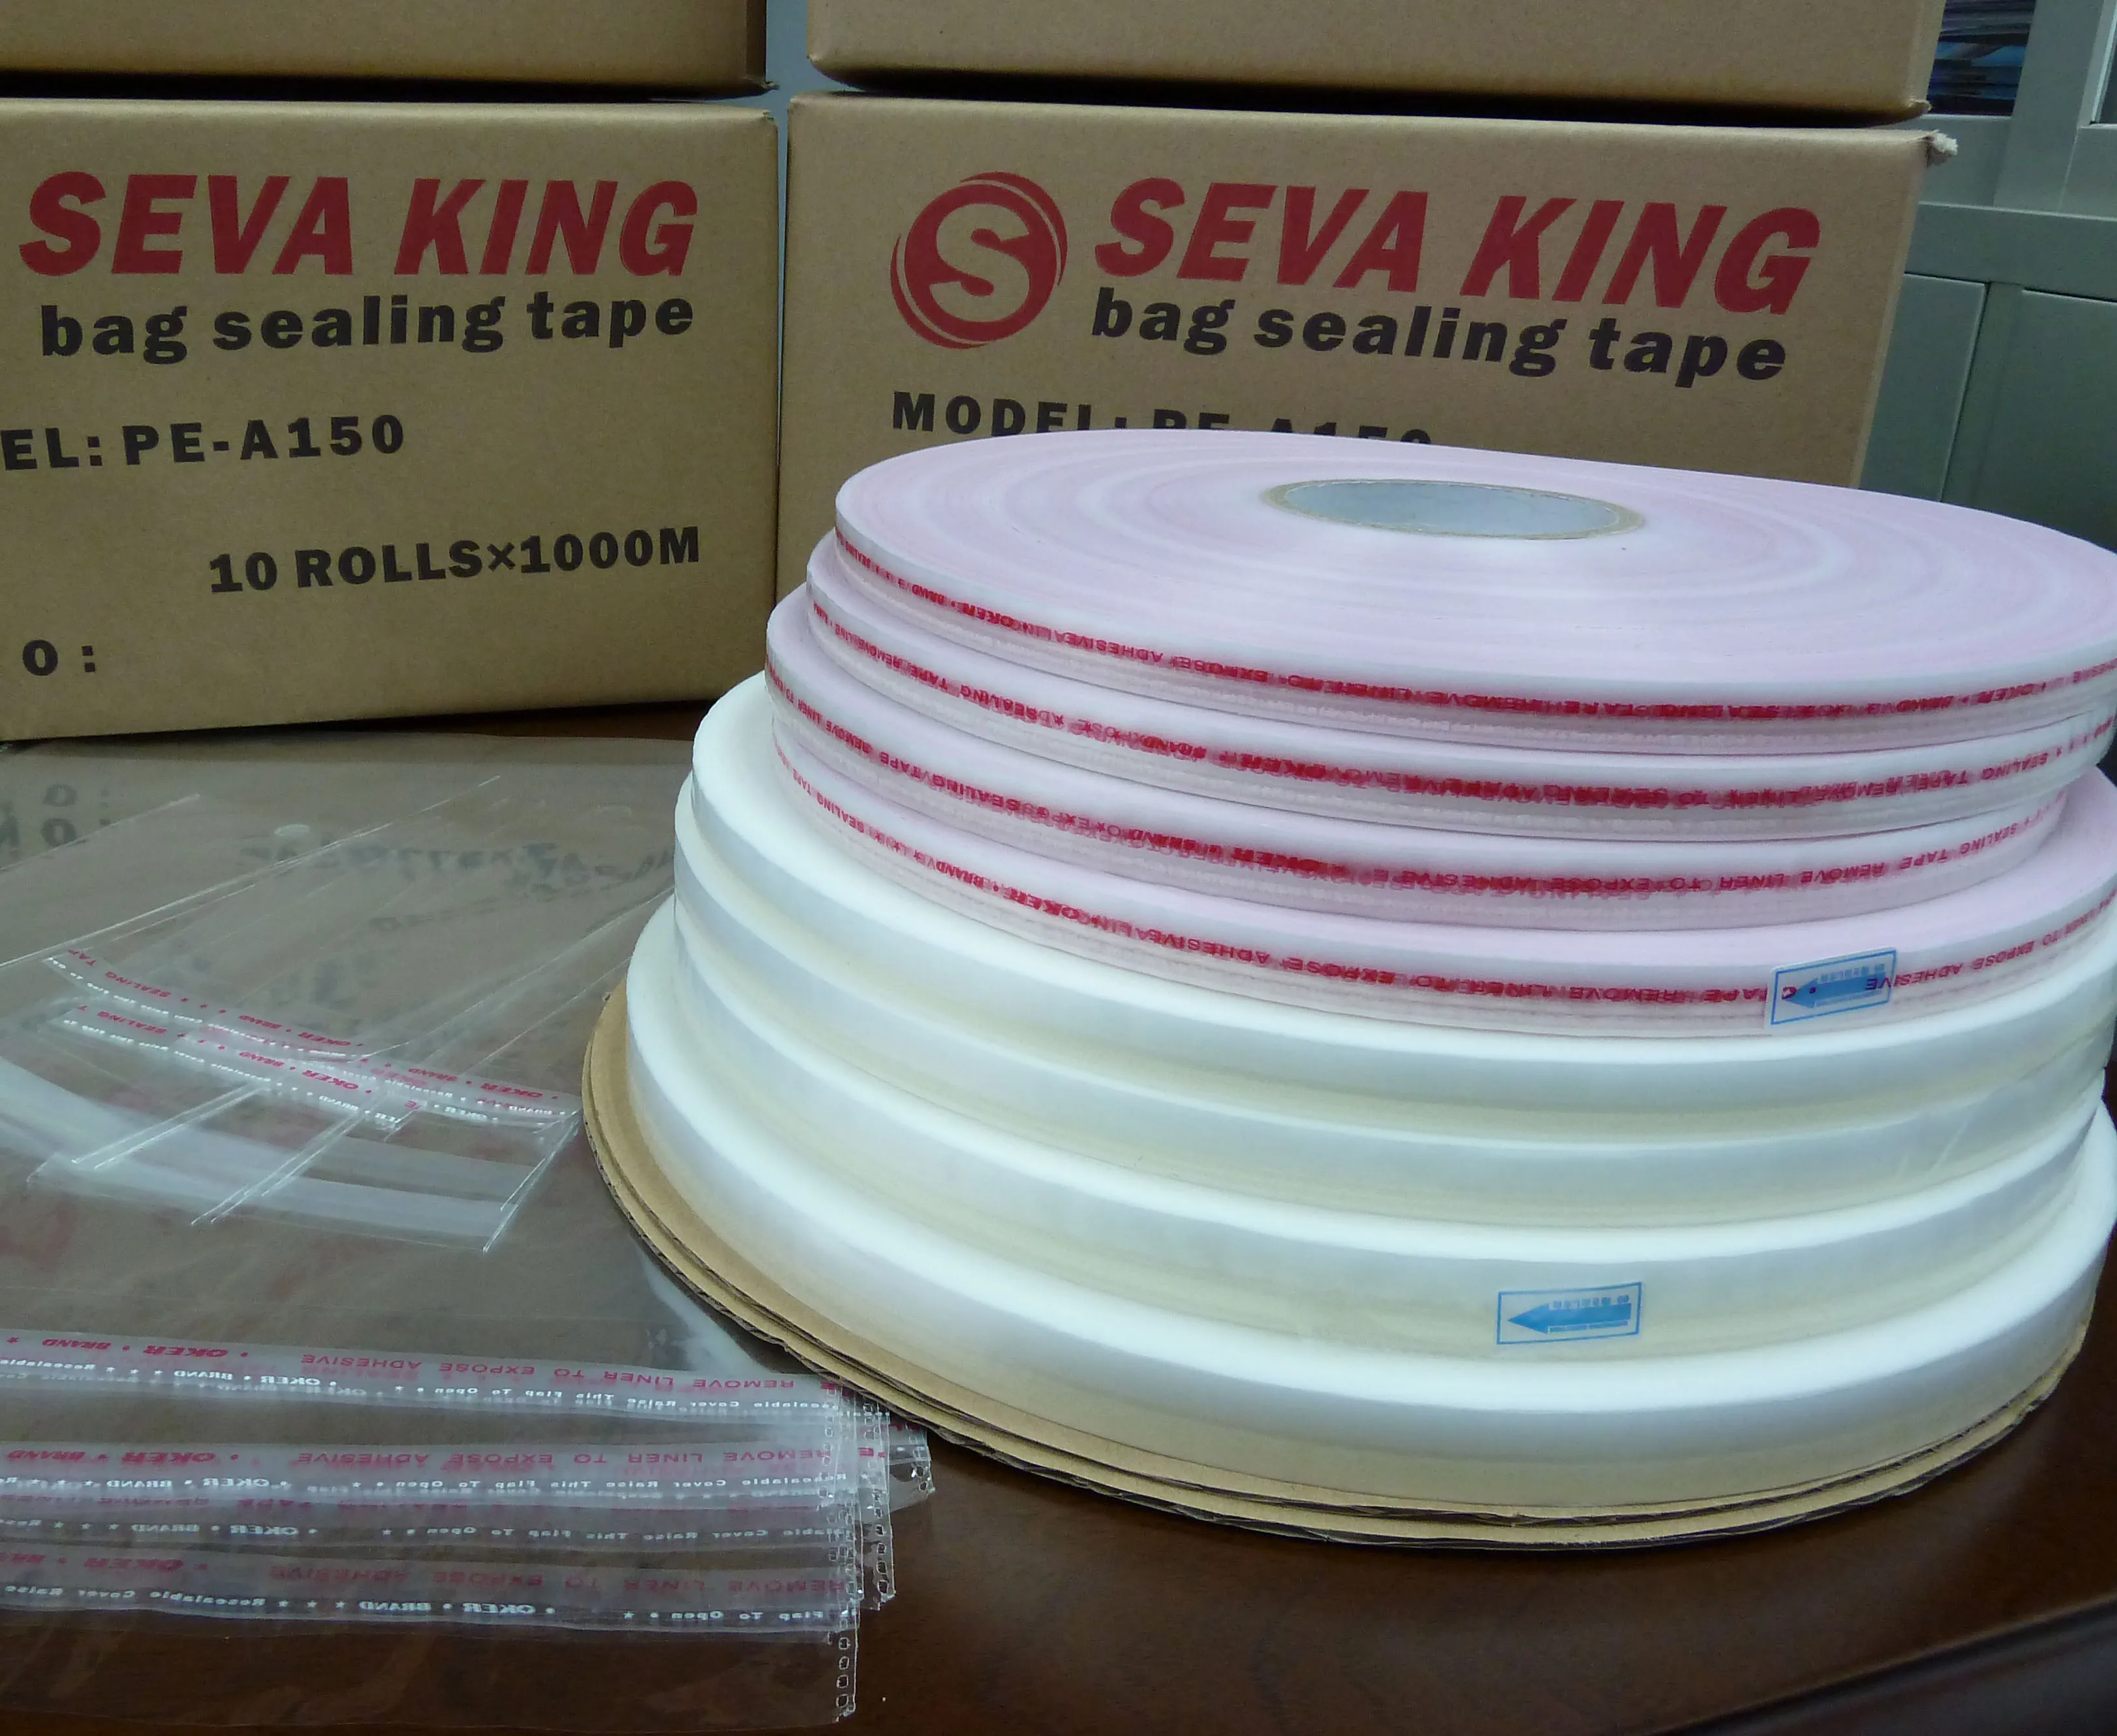 India hot sale Original OKER SEALING TAPE REAL Manufacturer Sticky adhesive double side silicone oil bag sealing tape